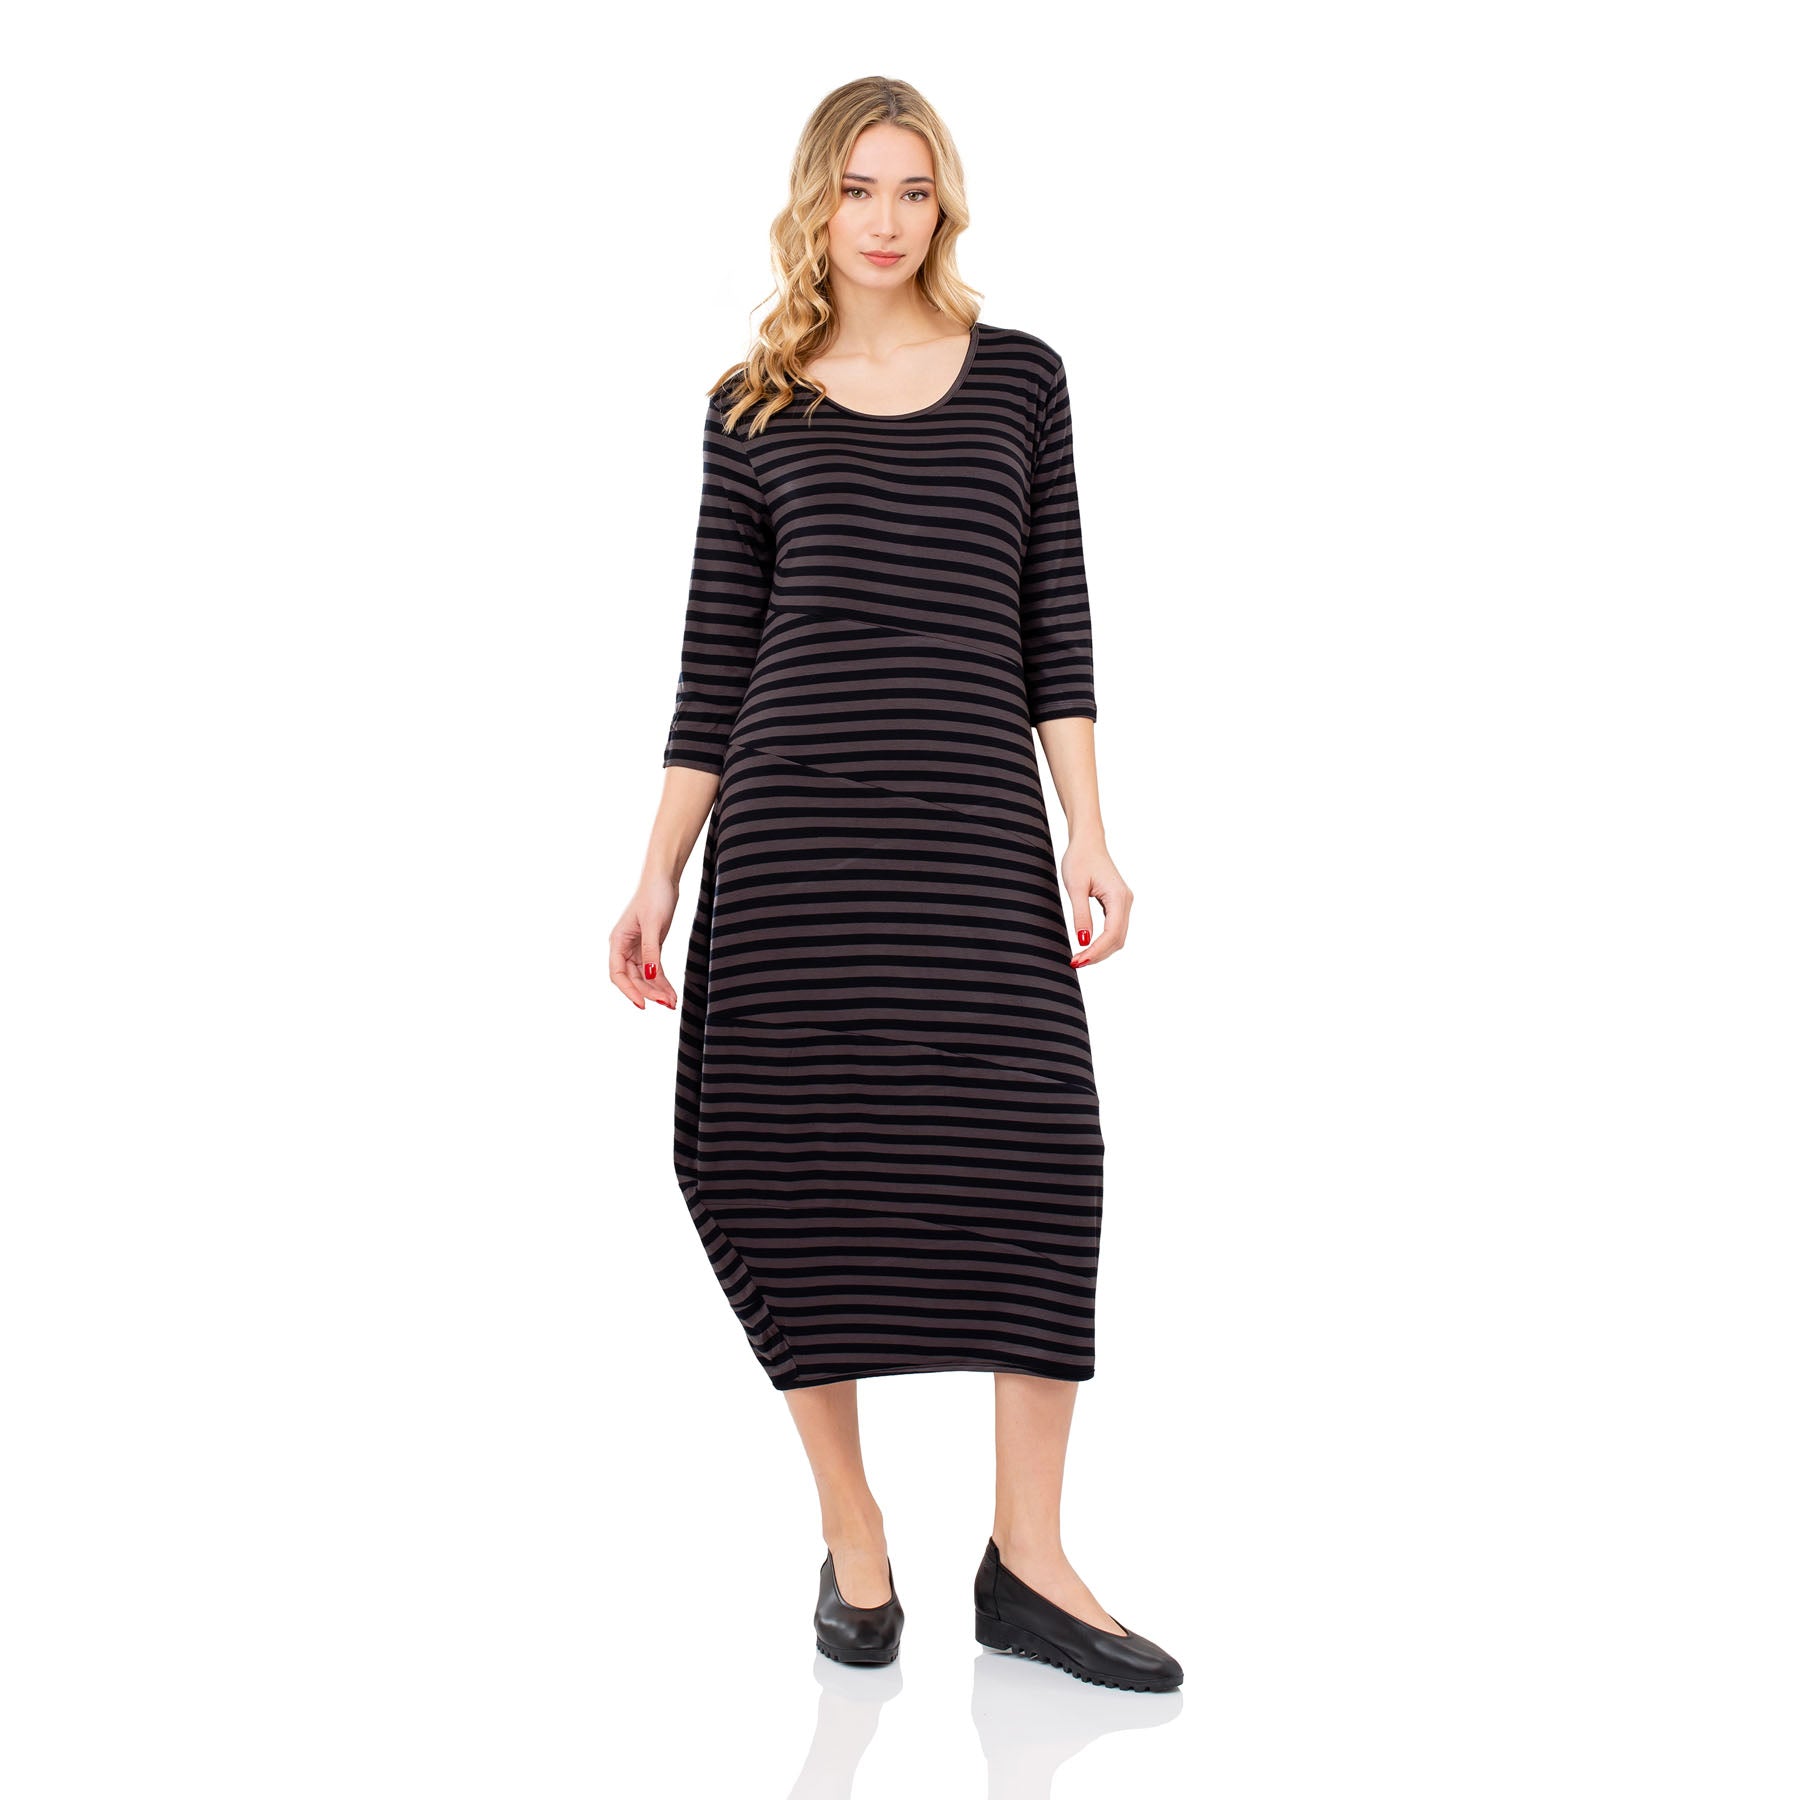 Juliette Dress - Black/Grey Striped - CHIC AND SIMPLE